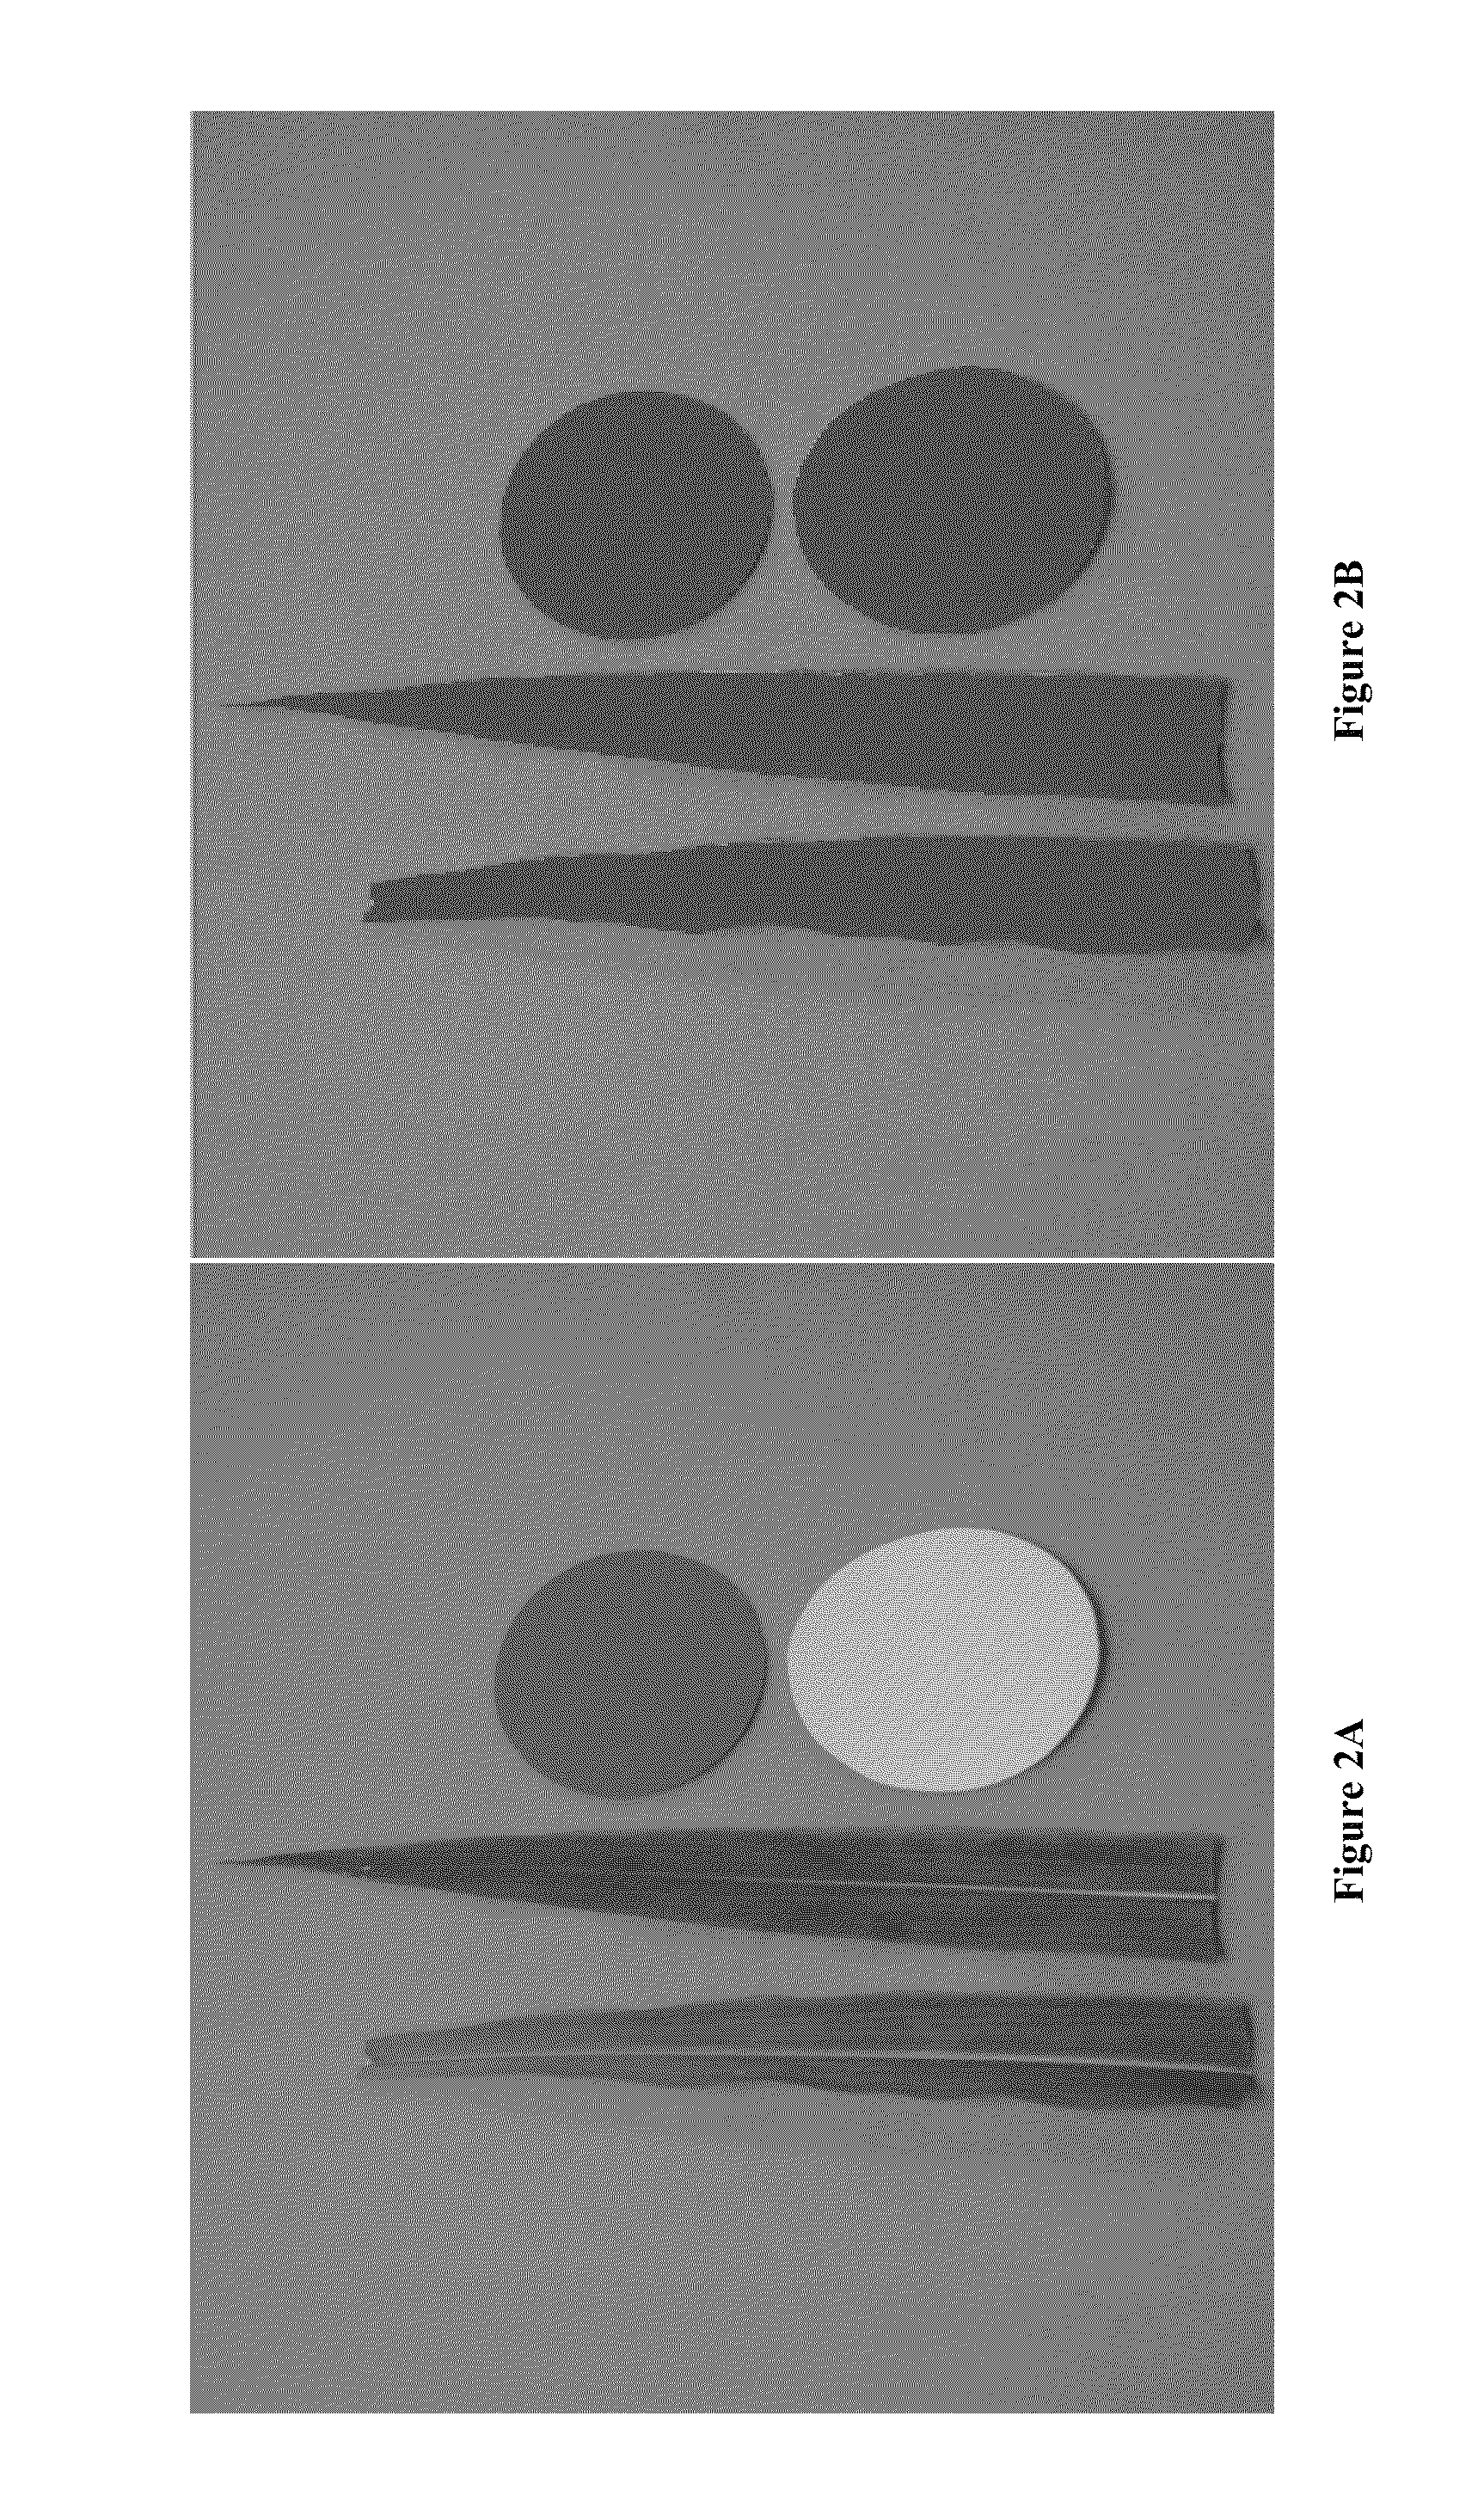 System and method of determining nitrogen levels from a digital image